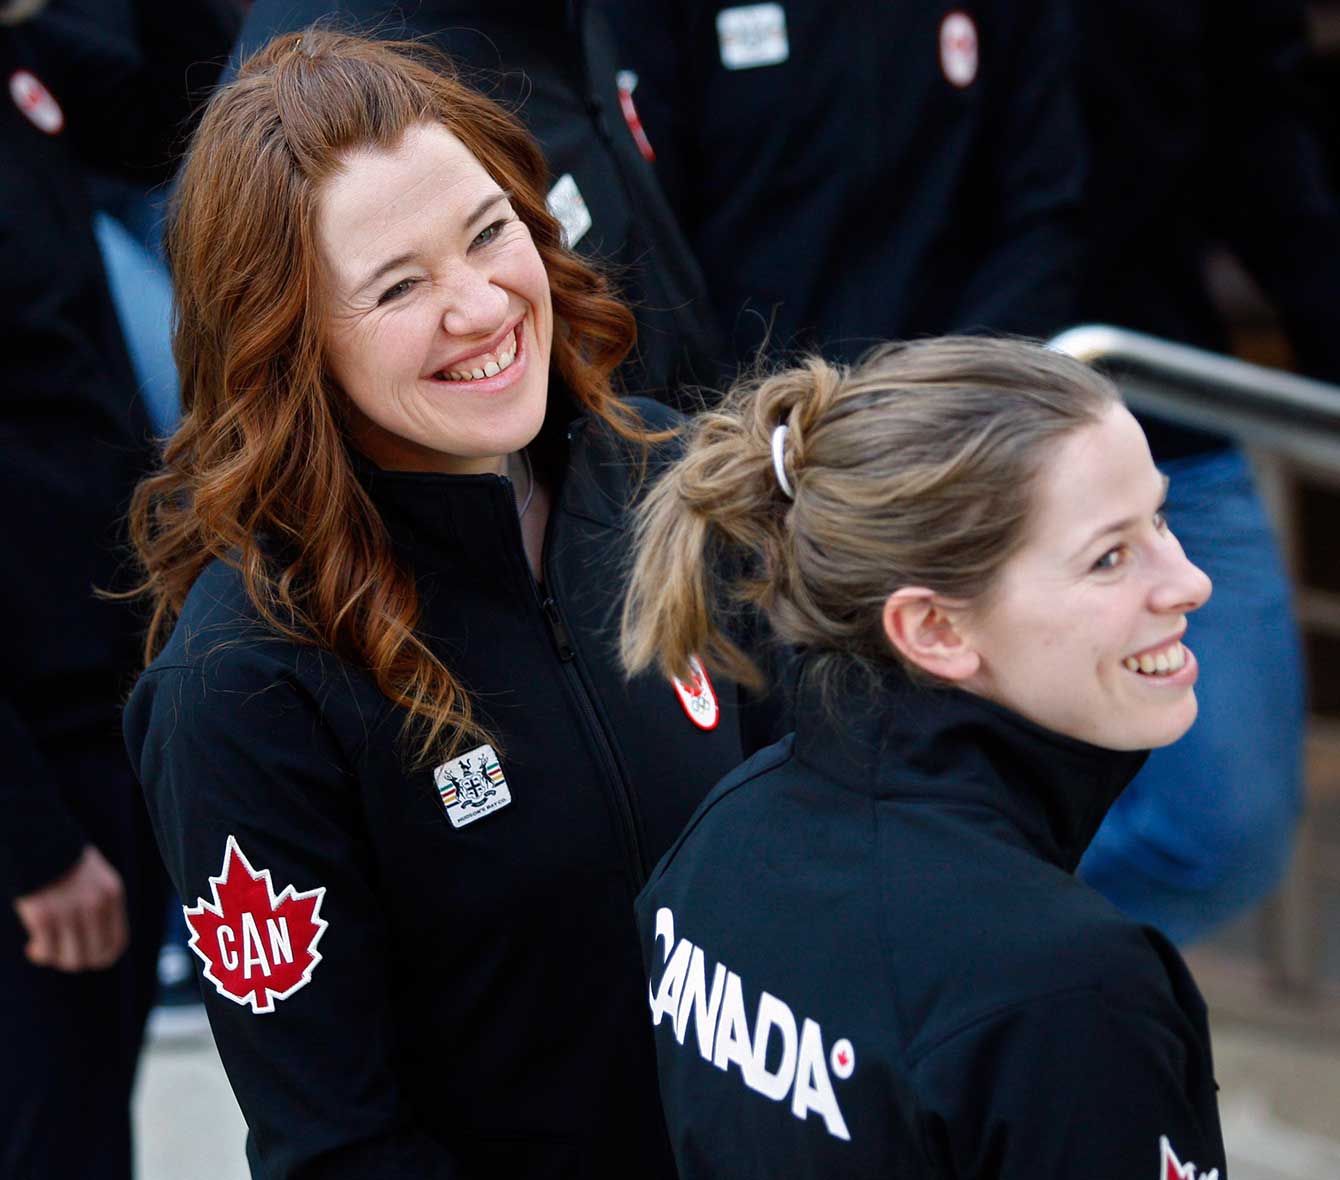 Clara Hughes, left, and Christine Nesbitt, smile before being named to the 2010 Olympic team in Calgary, Monday, Jan. 11, 2010. THE CANADIAN PRESS/Jeff McIntosh